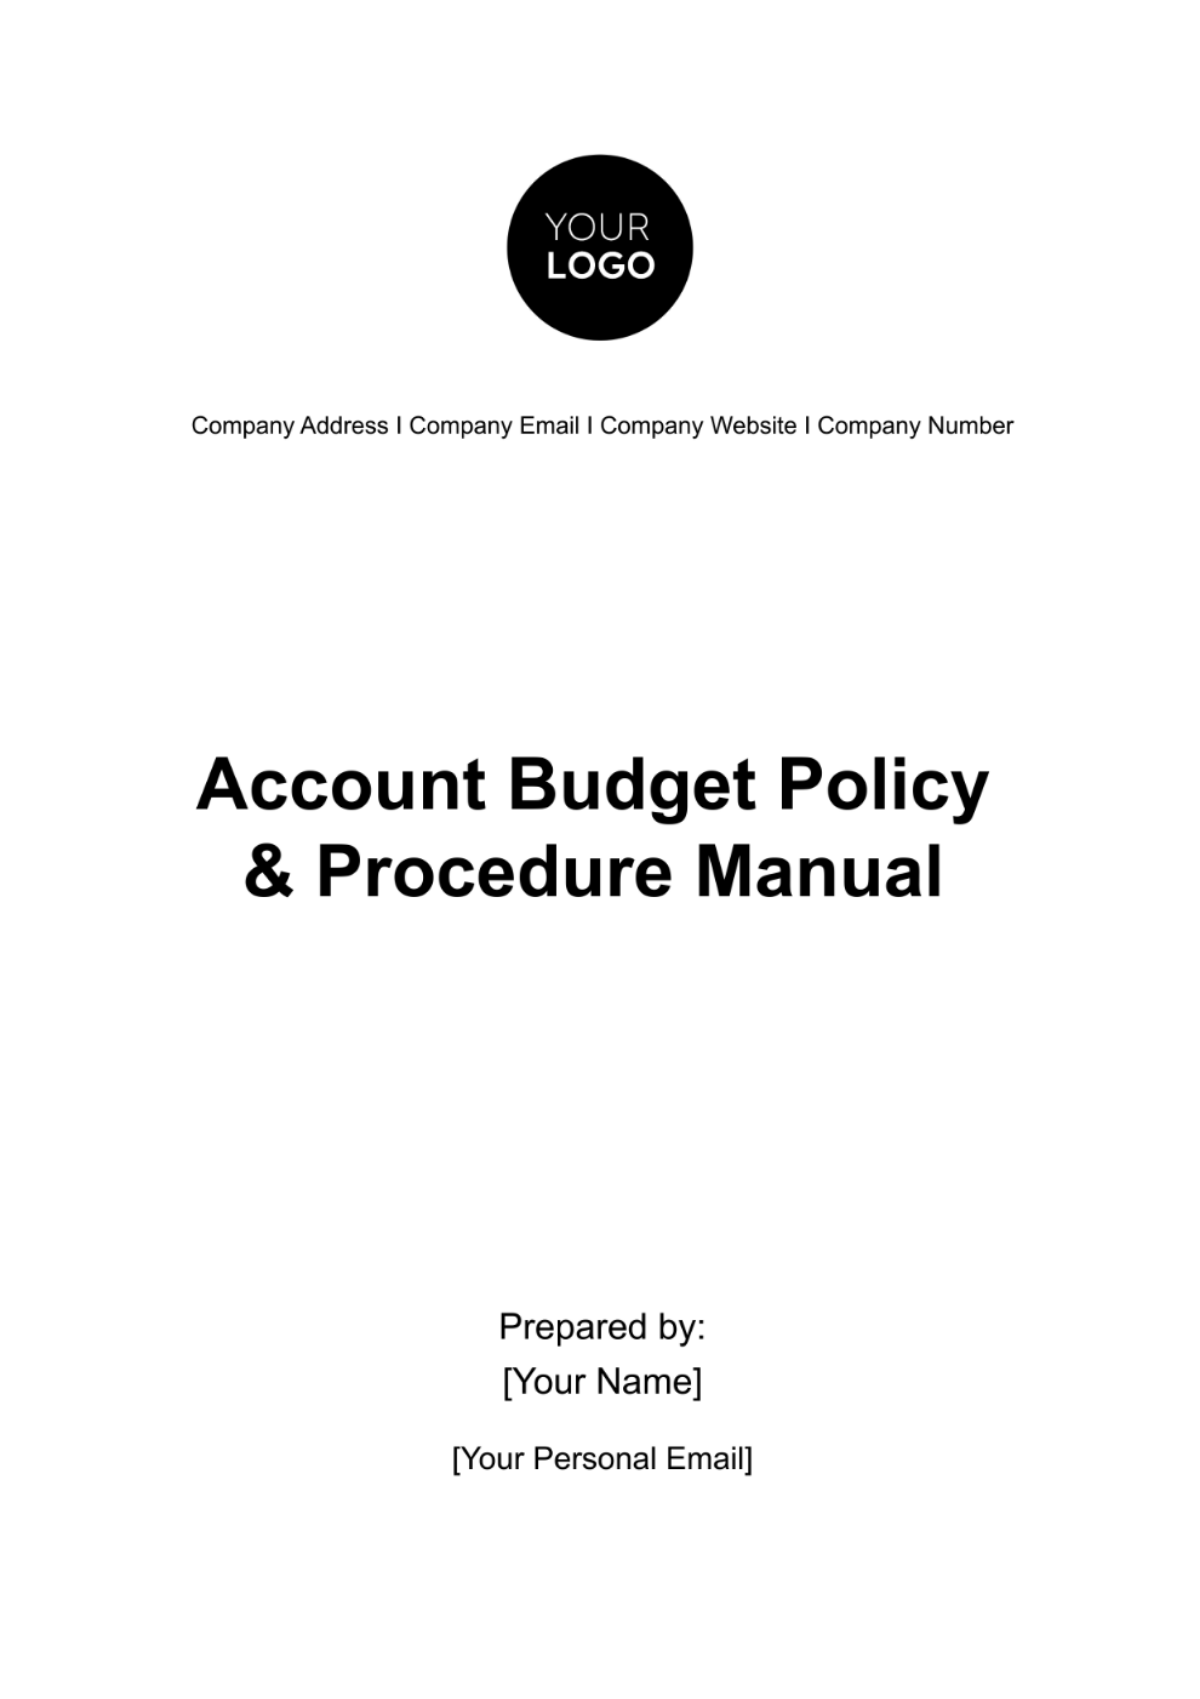 Free Account Budget Policy & Procedure Manual Template